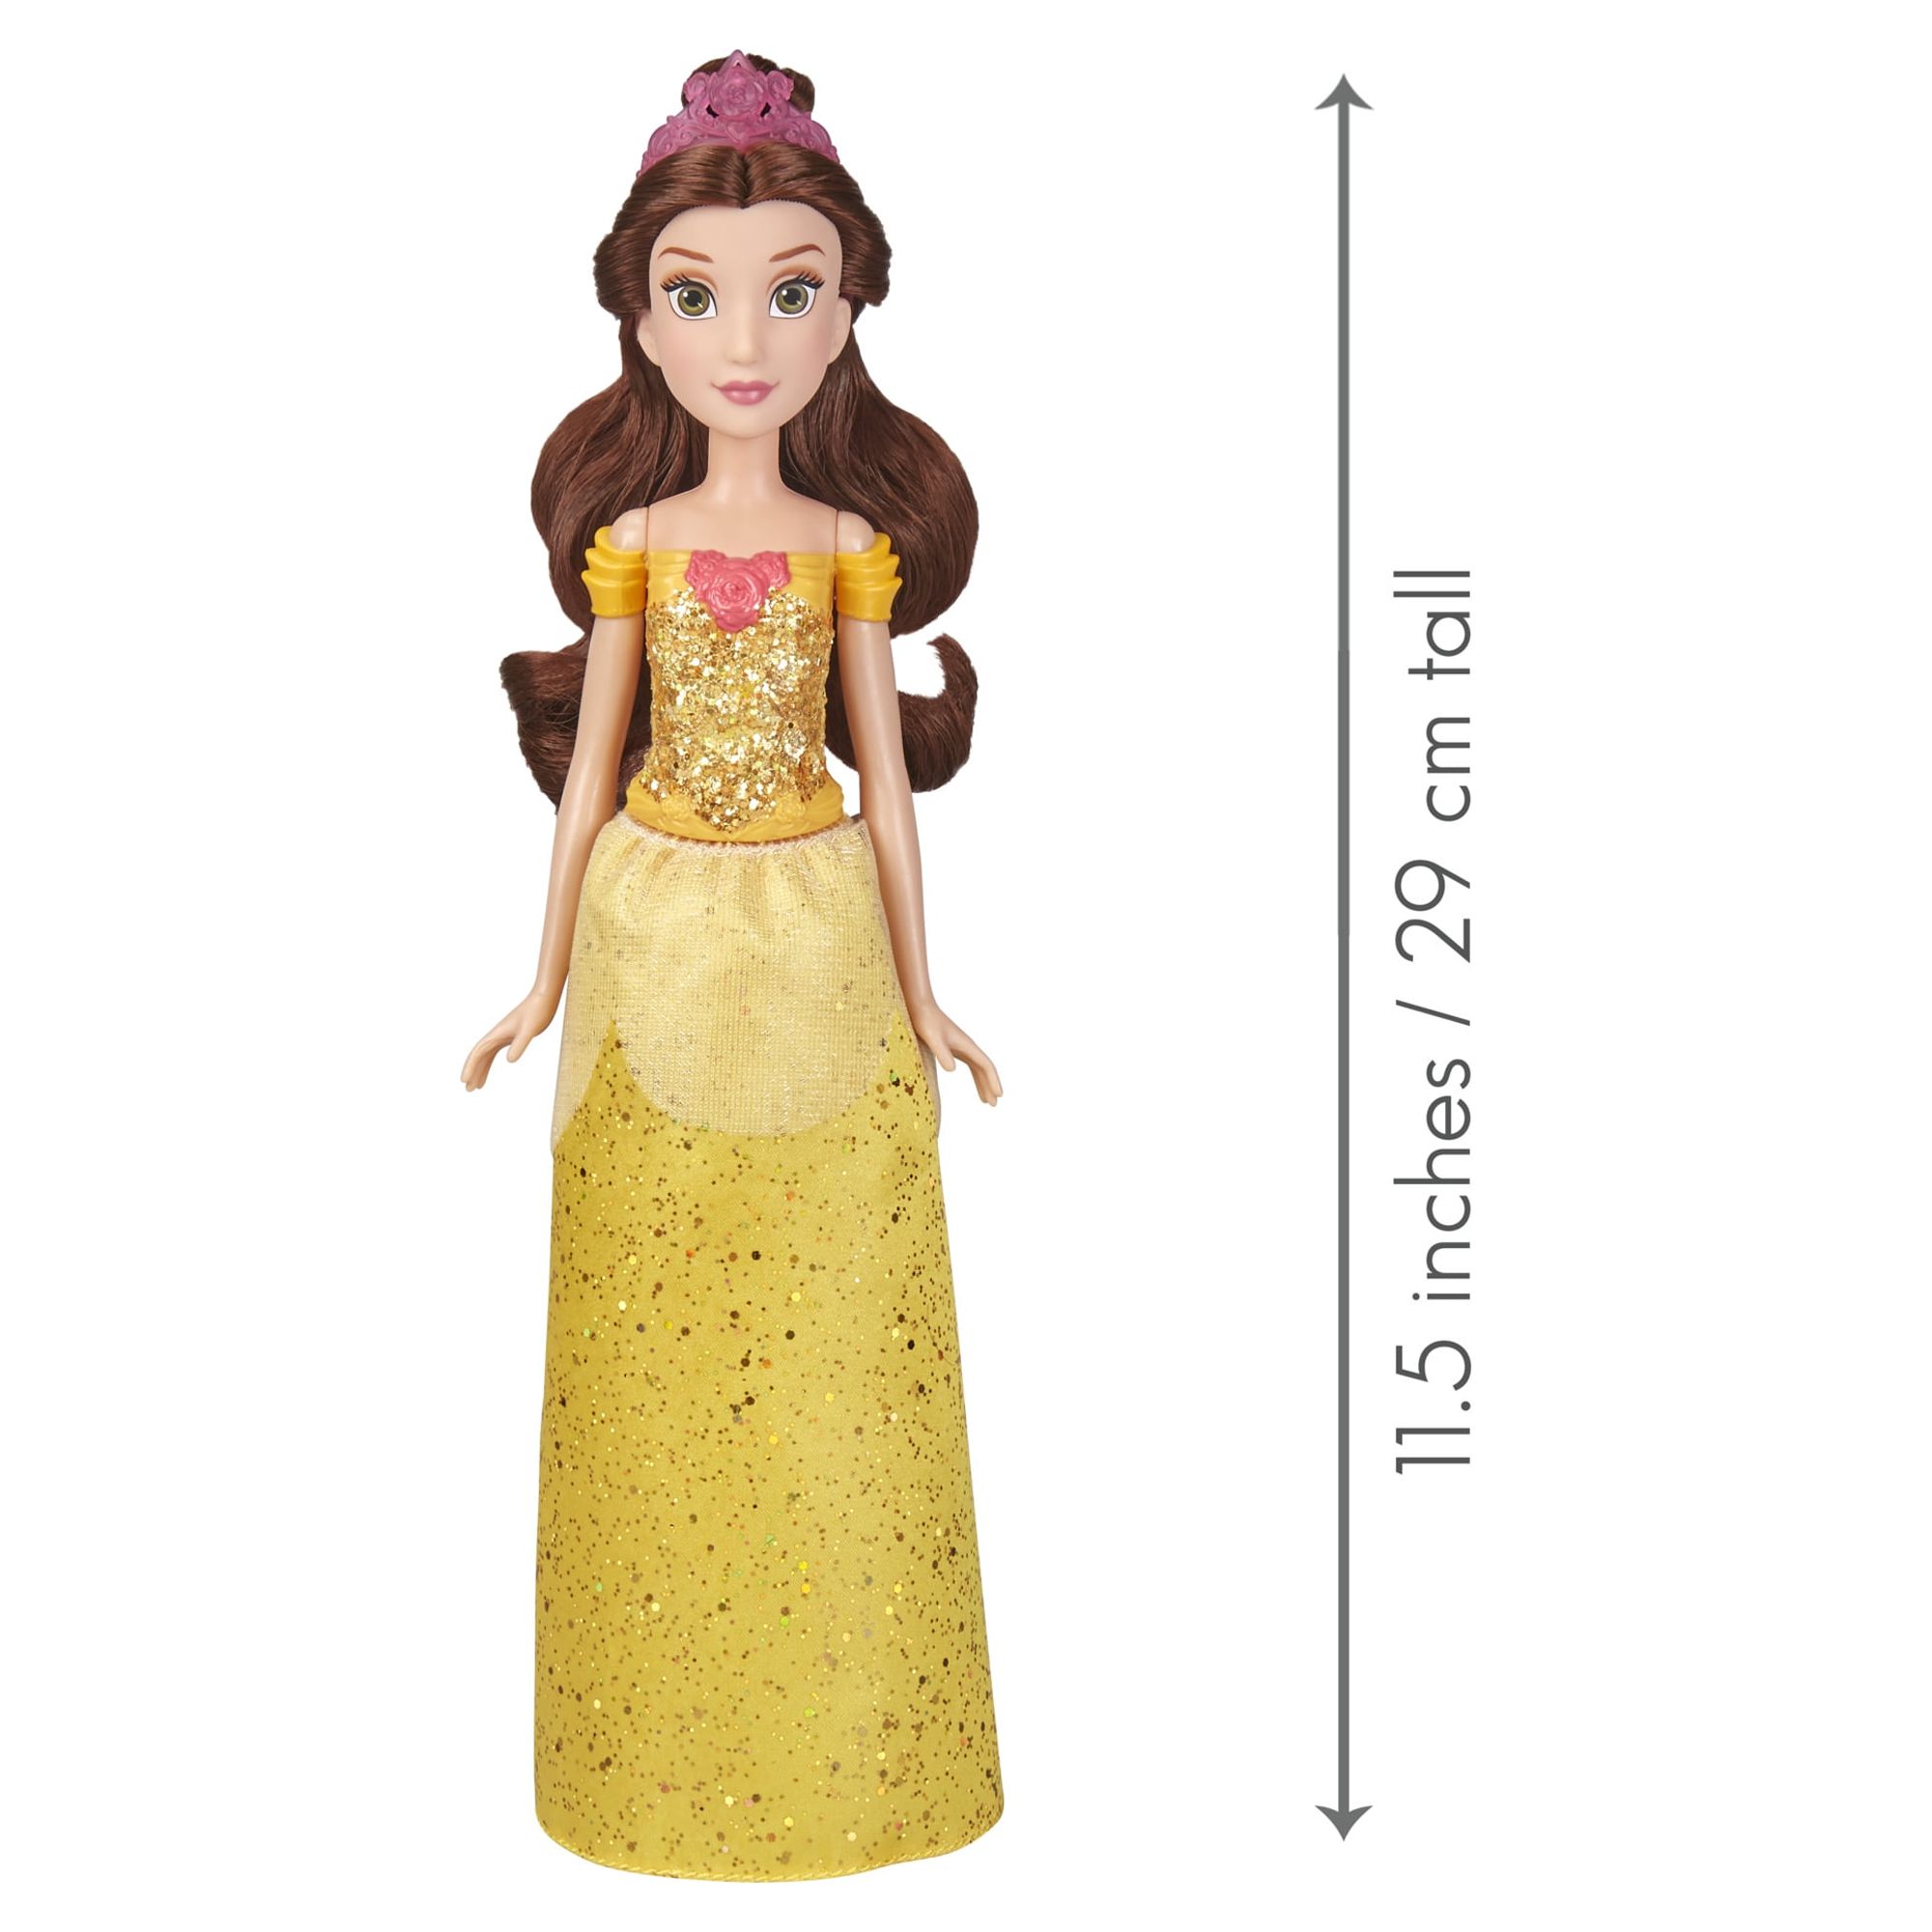 Disney Princess Royal Shimmer Belle with Sparkly Skirt, Includes Tiara and Shoes - image 10 of 16